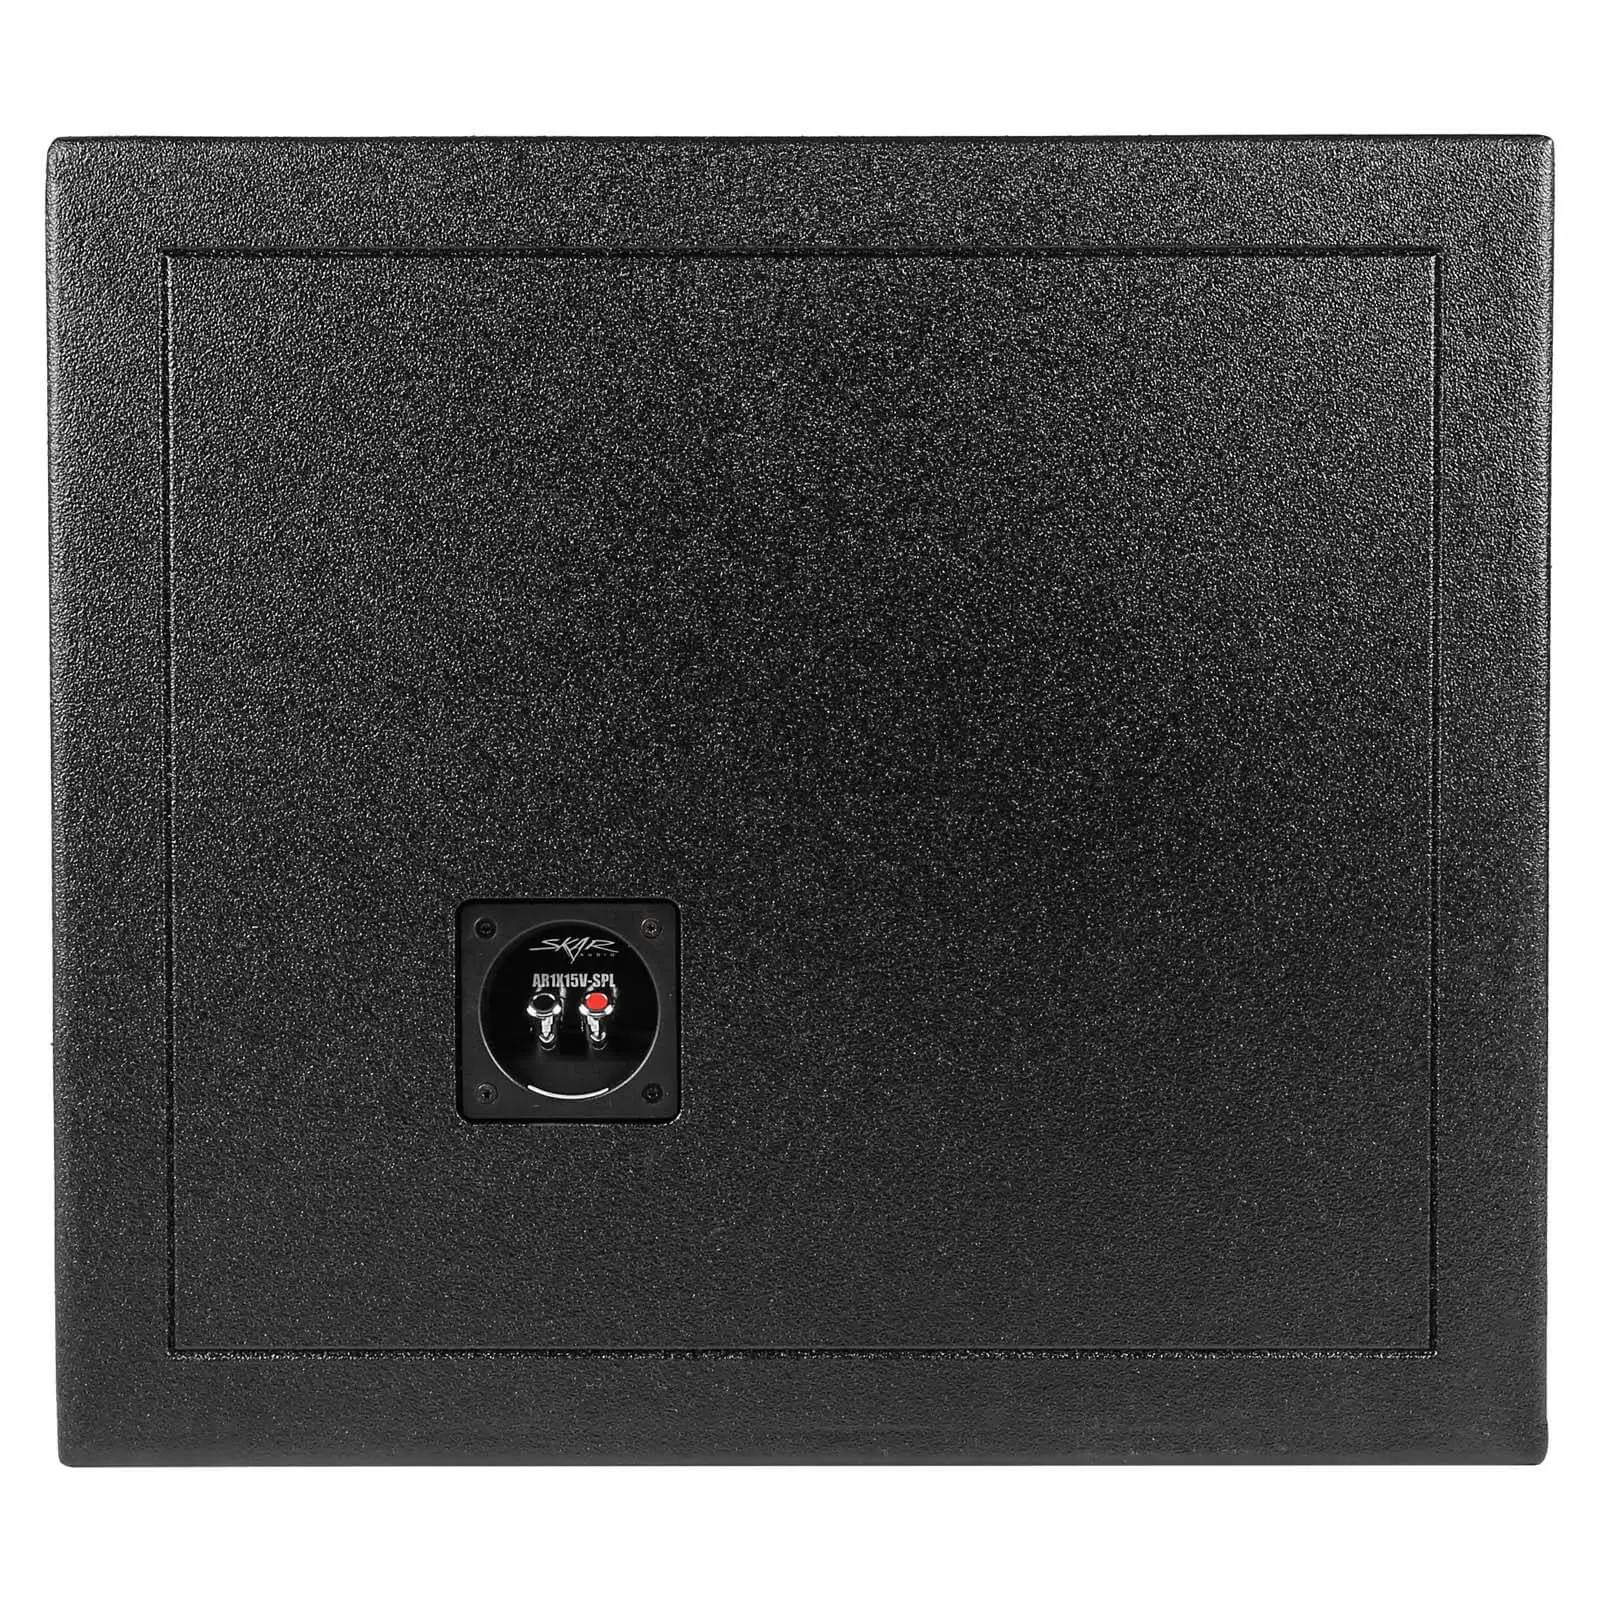 Featured Product Photo 5 for Single 15" 'SPL Series' Armor Coated Ported Subwoofer Enclosure